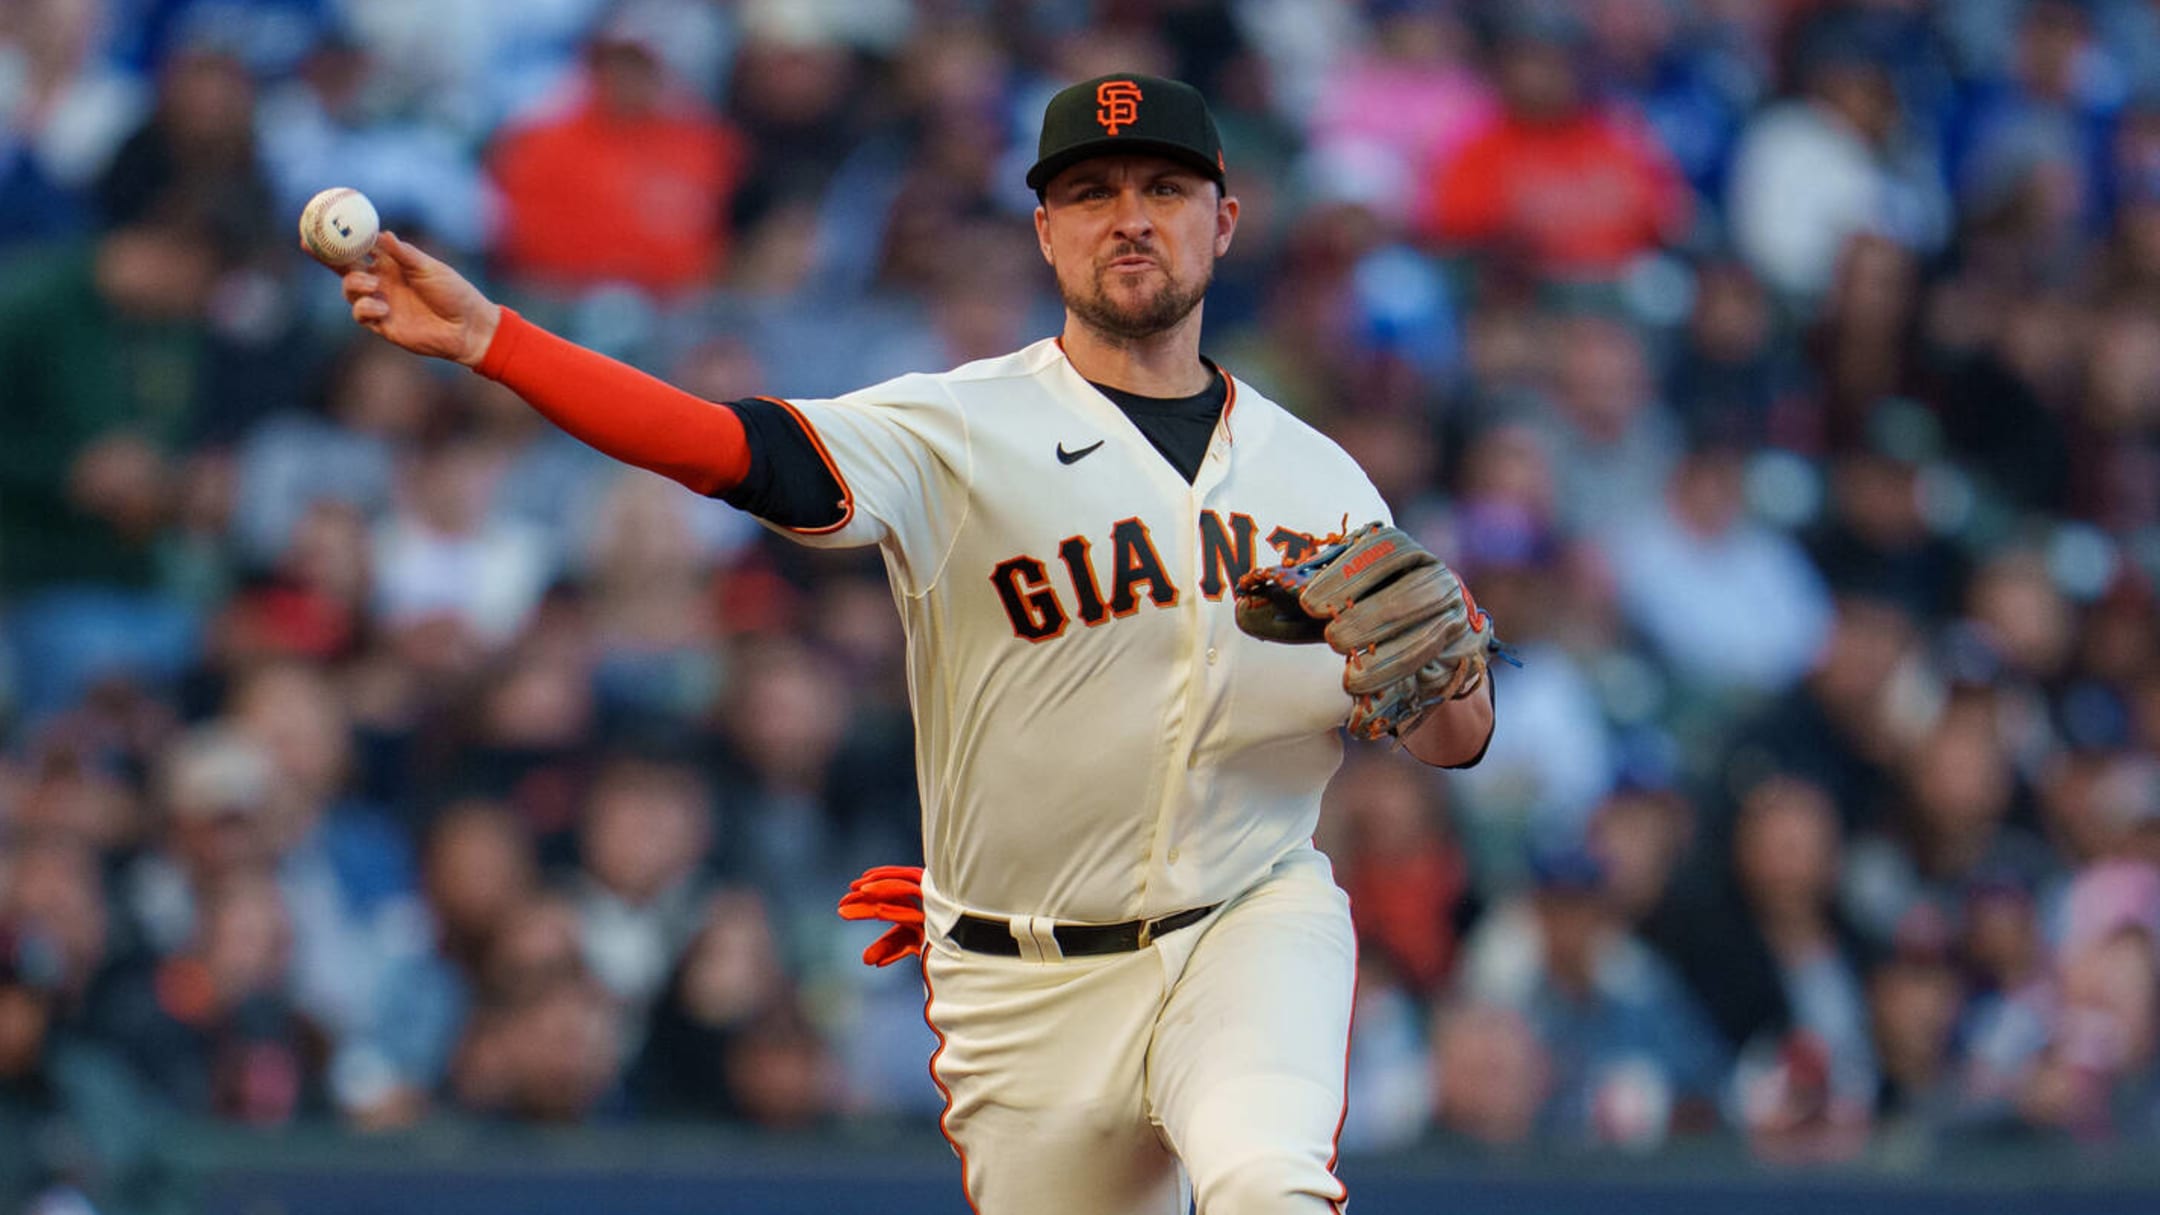 New Giants pickup J.D. Davis hated current team when younger?